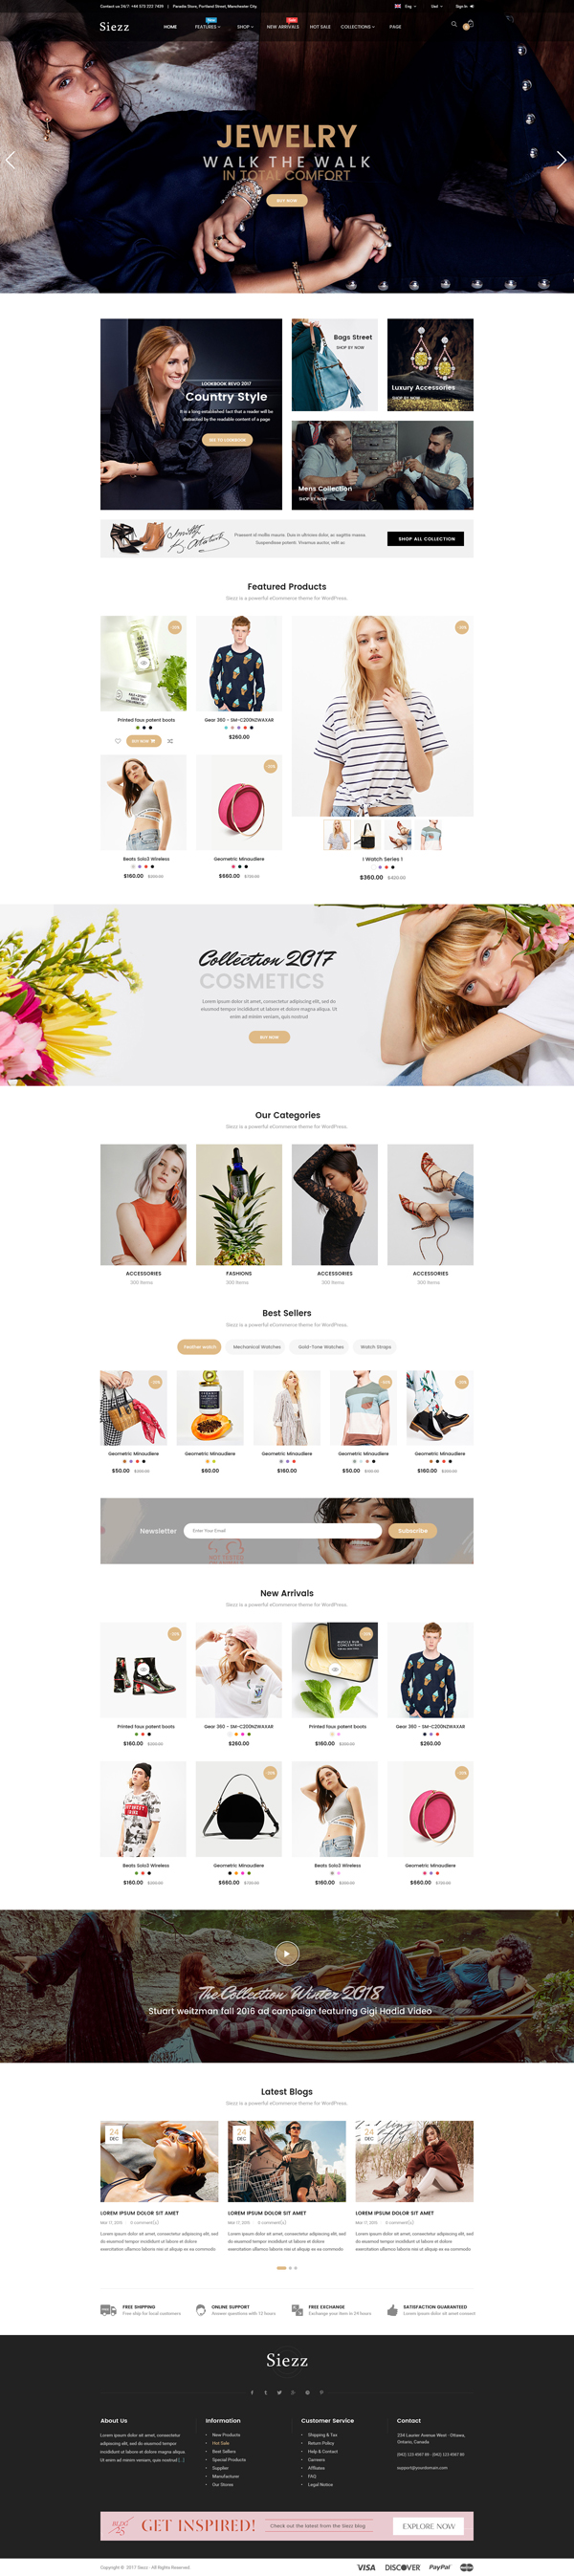 Siezz - Modern Multipurpose MarketPlace WordPress Theme (Mobile Layout Included)